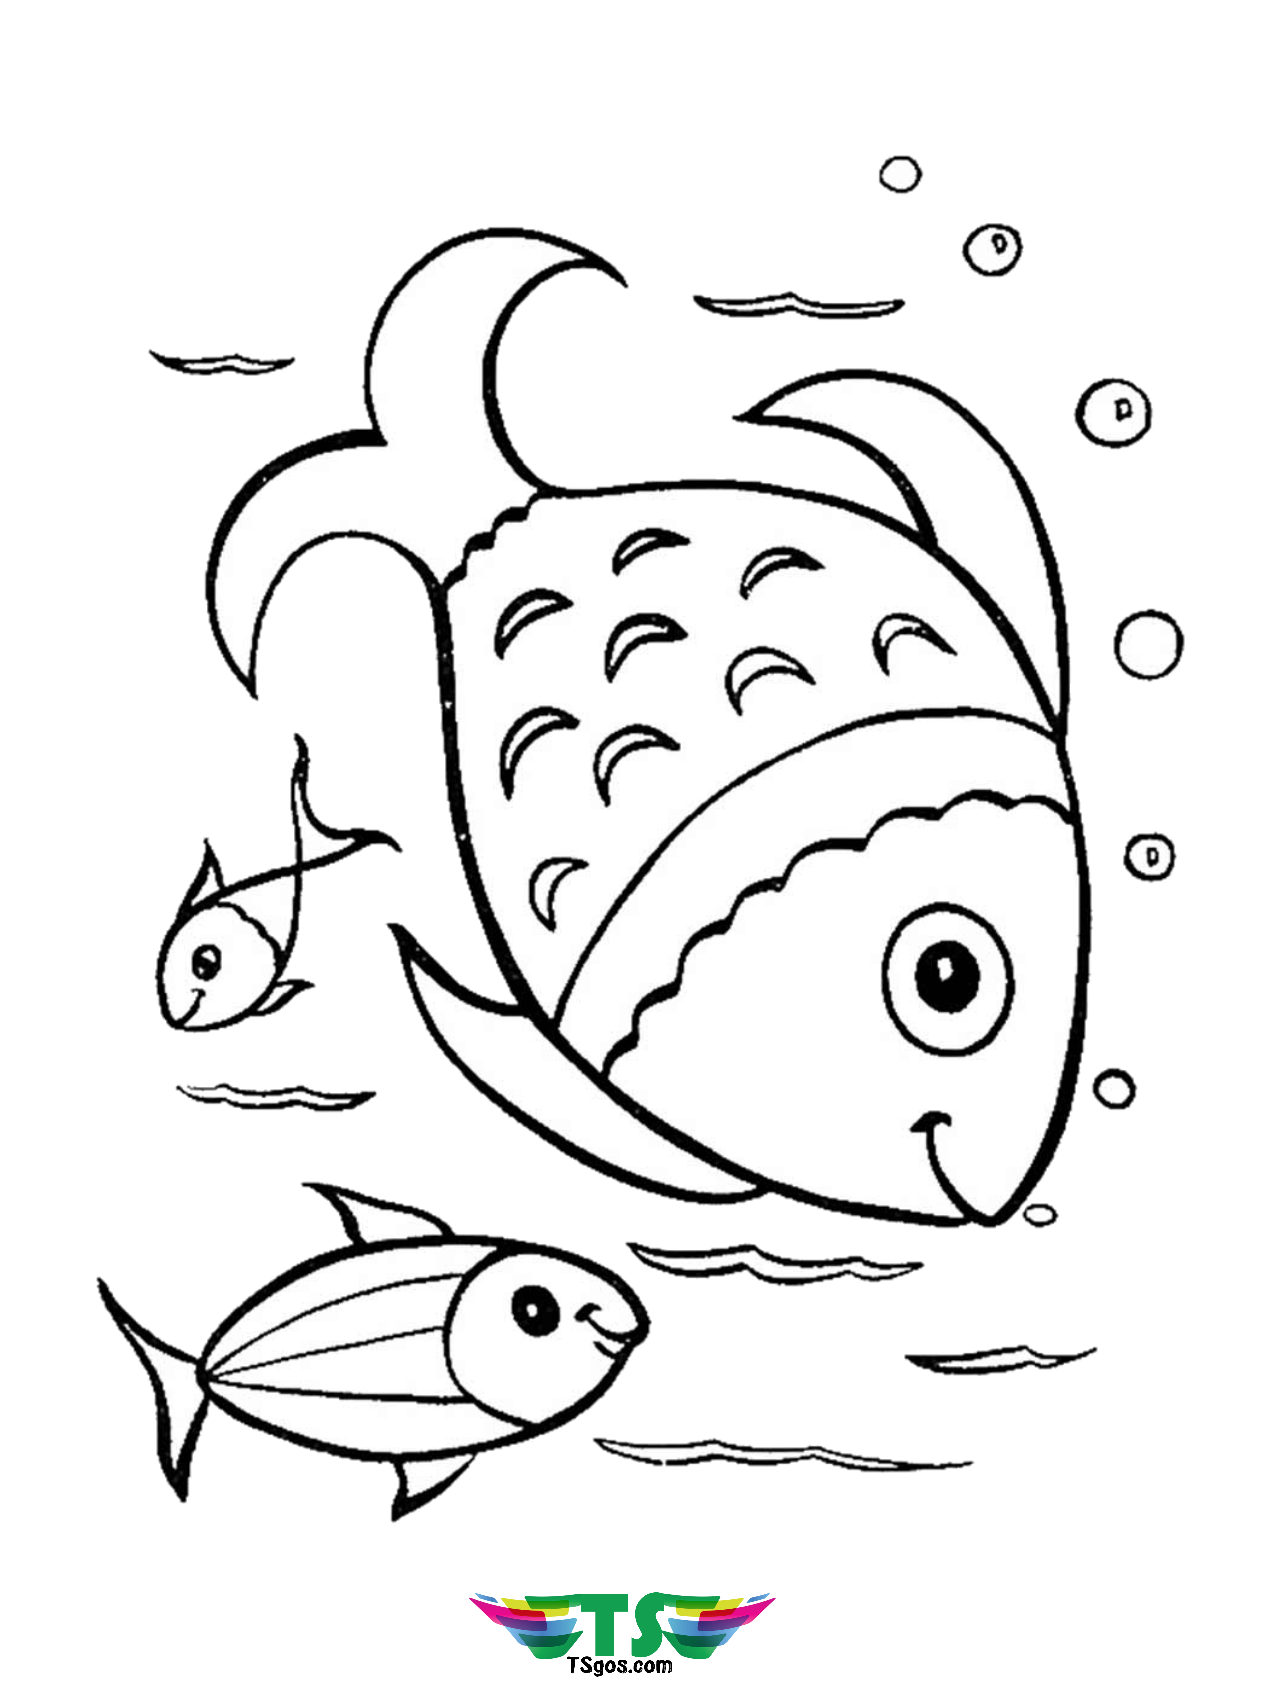 Free download beautiful fish coloring page for toddlers. - TSgos.com